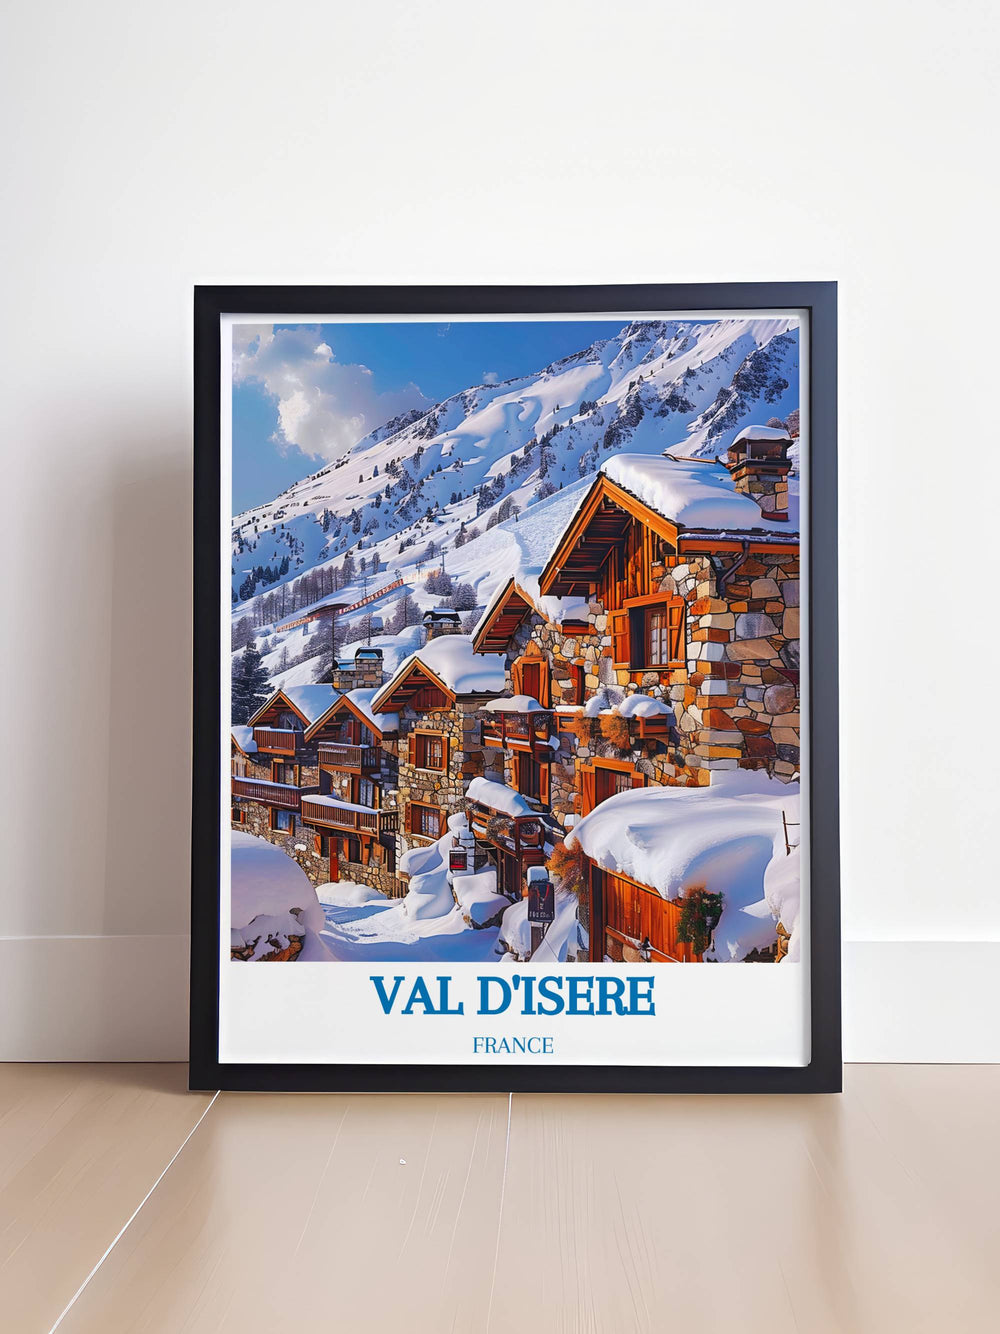 Val dIsère le Fornet art print showcasing the serene beauty of one of Frances premier ski destinations. Ideal for adding a touch of adventure and elegance to your living space.